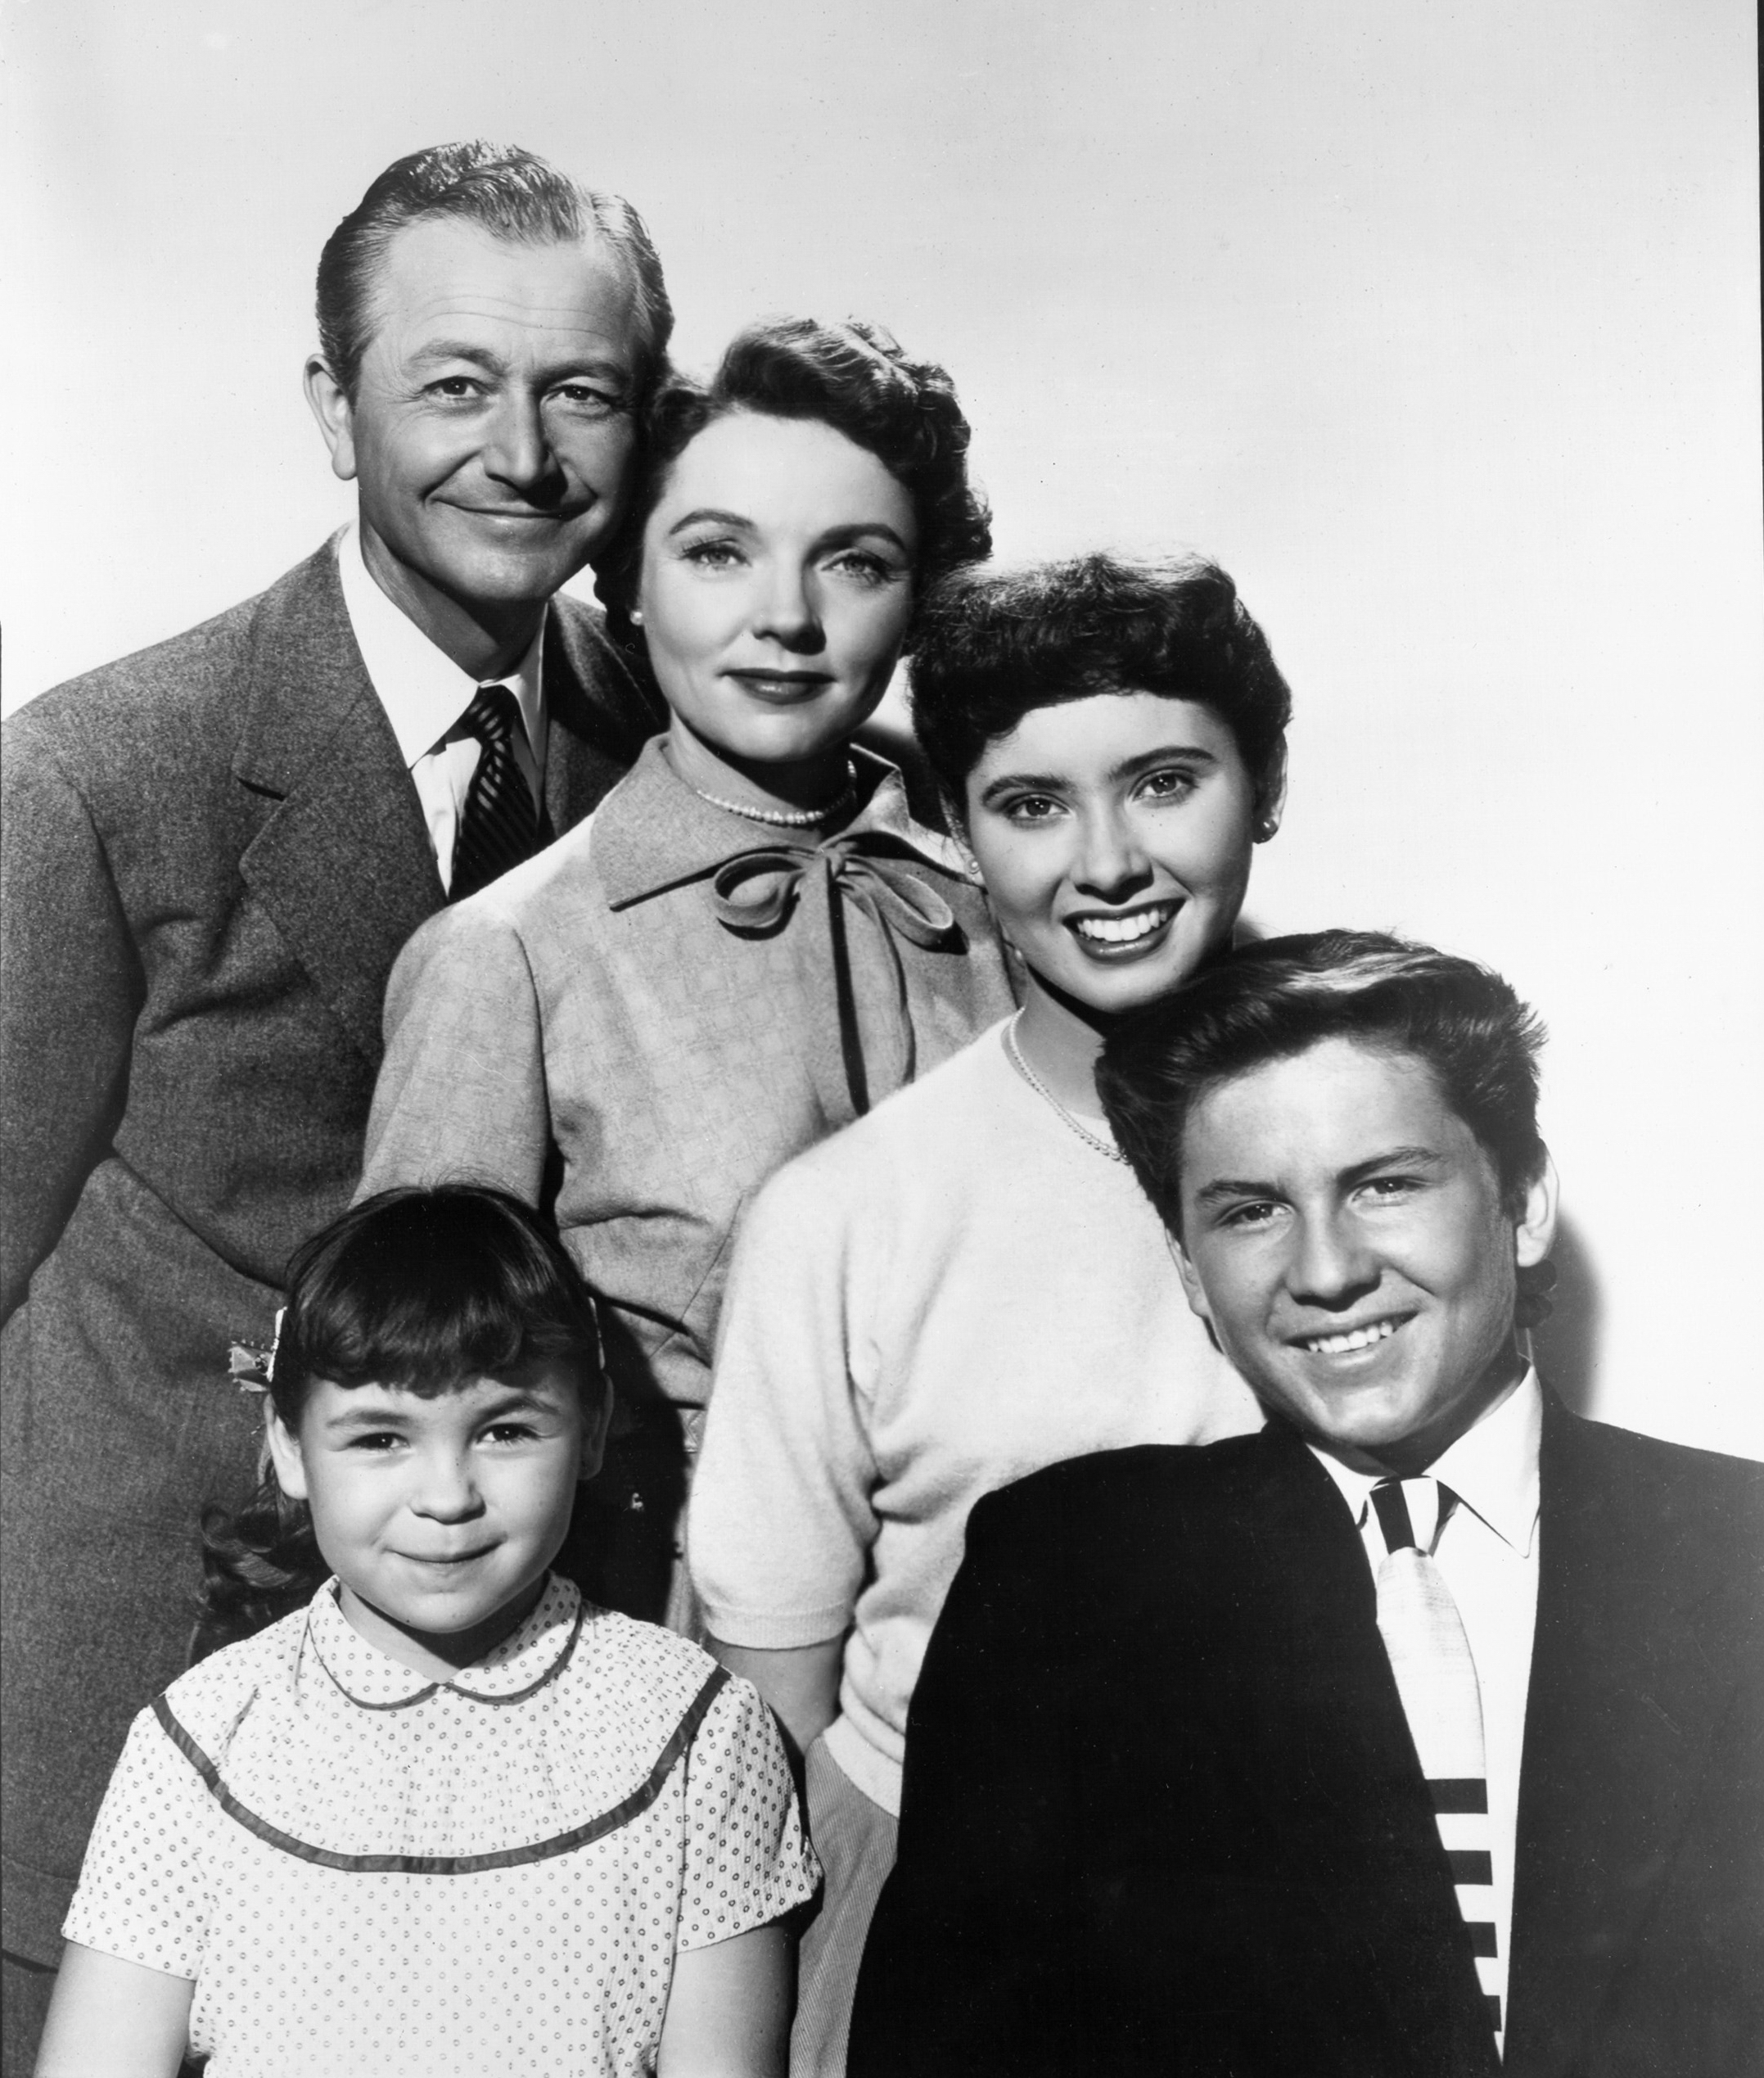 The cast members of "Father Knows Best" Robert Young as Jim Anderson, Jane Wyatt as Margaret, Elinor Donahue as Betty, Billy Gray as James Jr. (Bud), and Lauren Chapin as Kathy "Kitten" Anderson on September 10, 1954 | Source: Getty Images